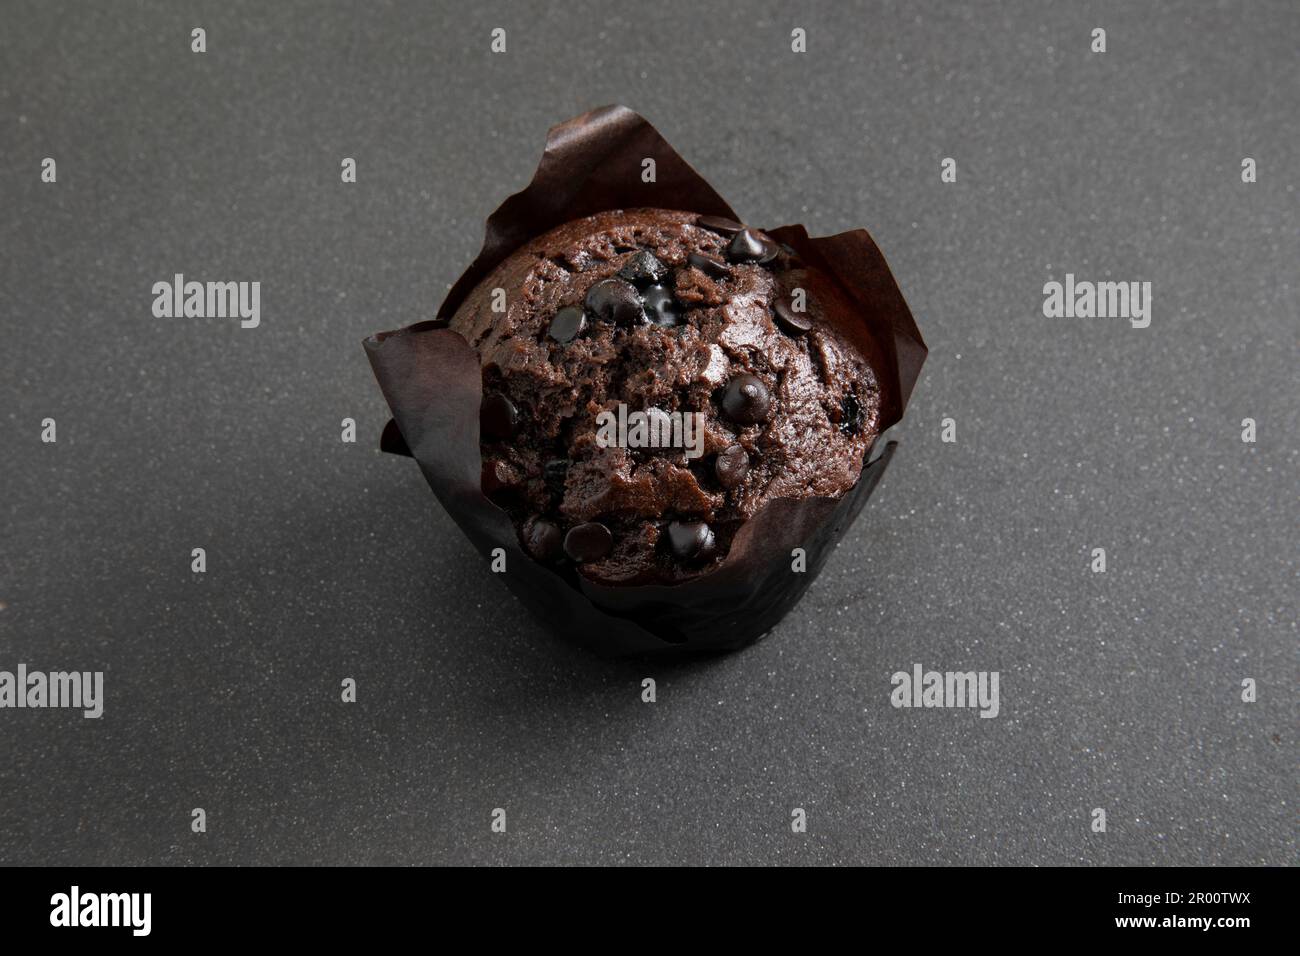 Chocolate muffin in brown paper cup with chocolate pieces on black background Stock Photo